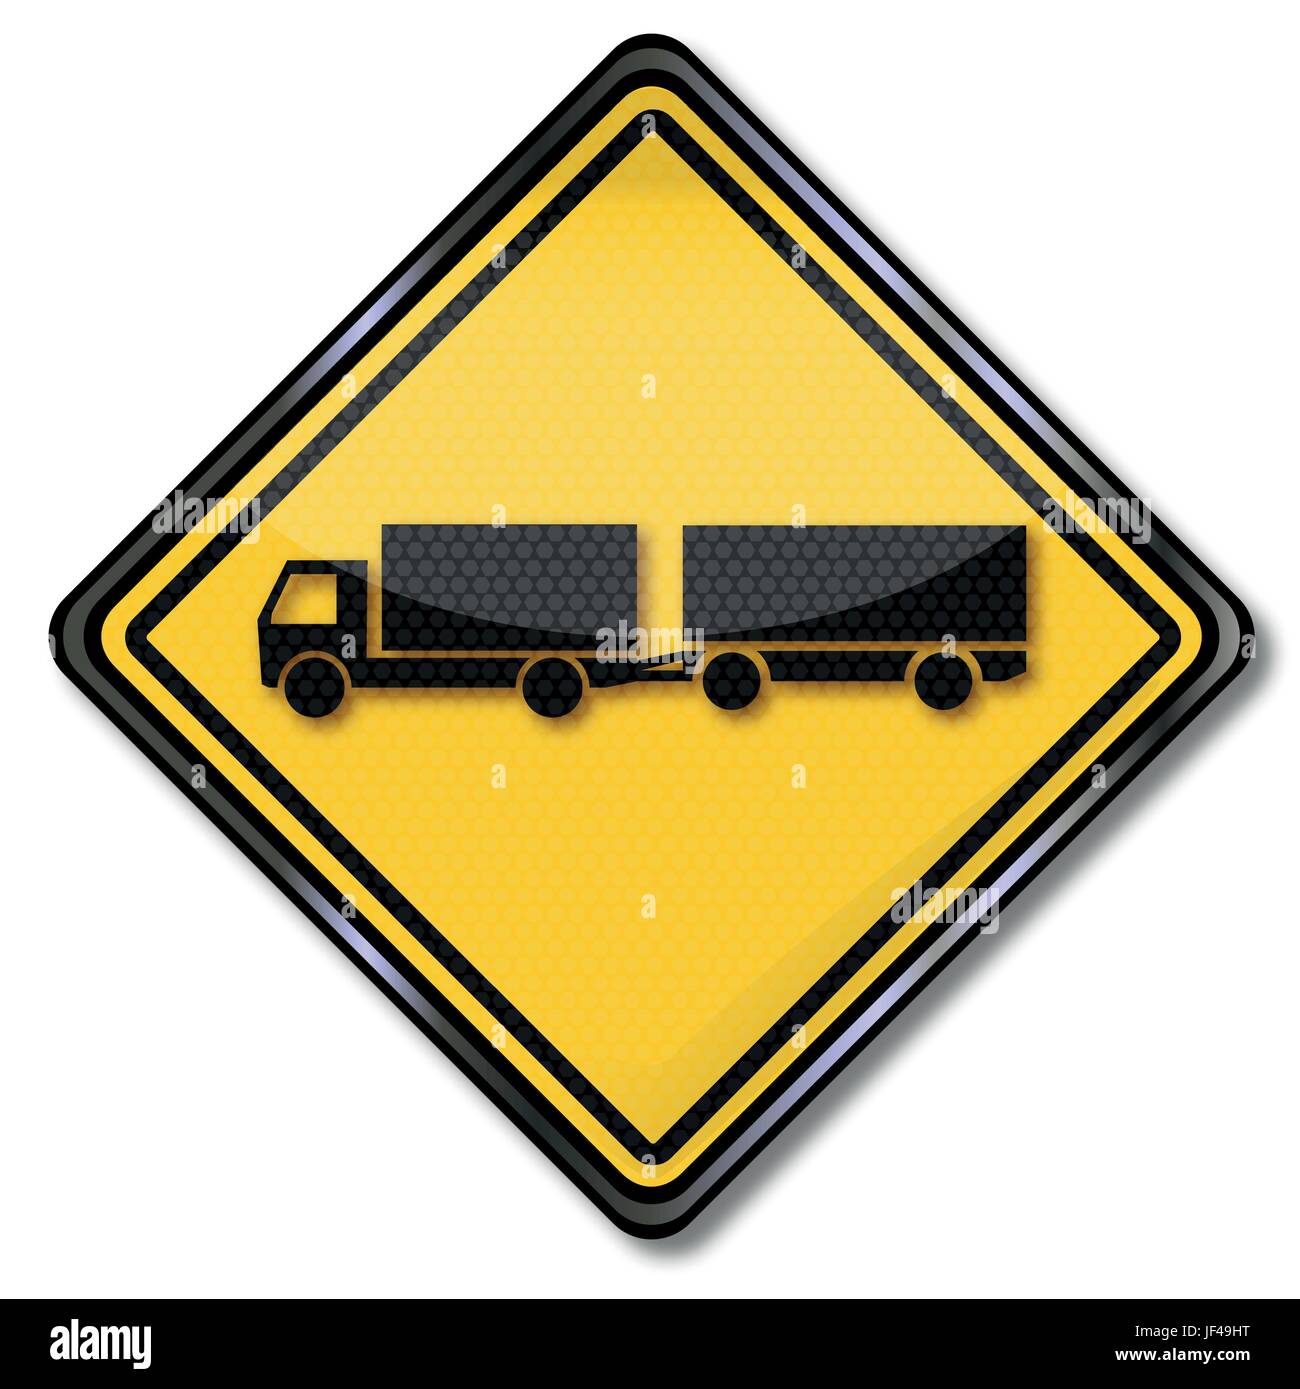 plate truck with biaxial trailer Stock Vector